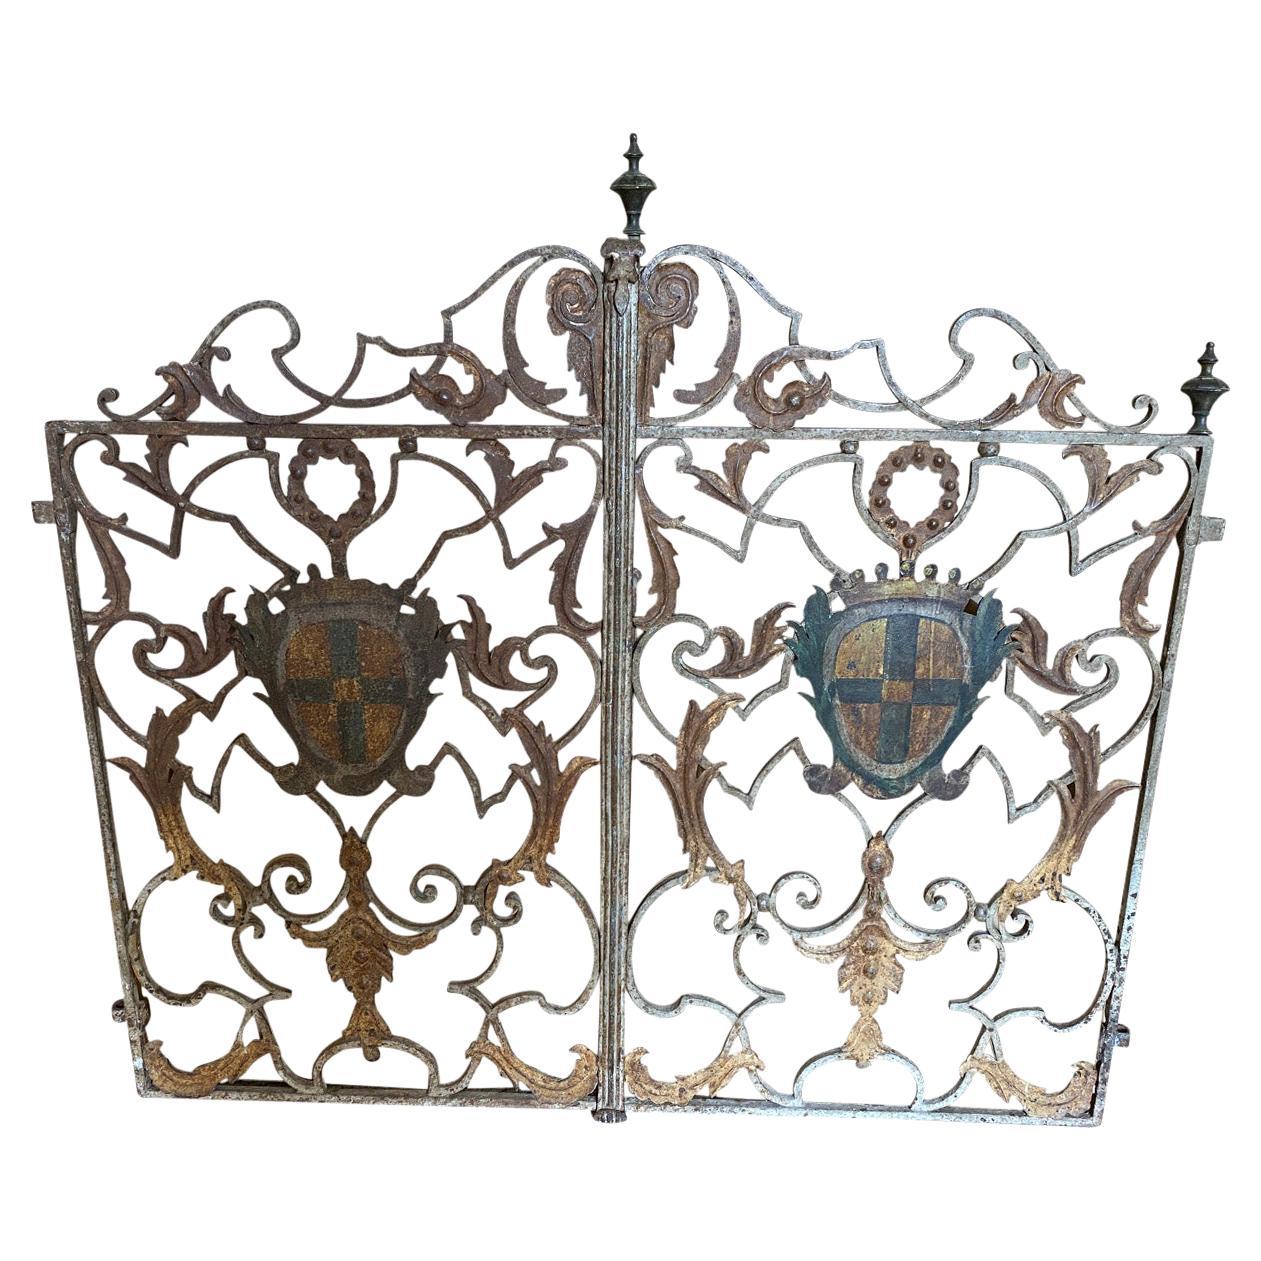 A delightful pair of 18th century ornamental iron gates from Italy. Beautifully crafted from iron with Blasson - Family Crest decoration. Not only wonderful as gates, but would be fabulous converted into a fireplace screen.